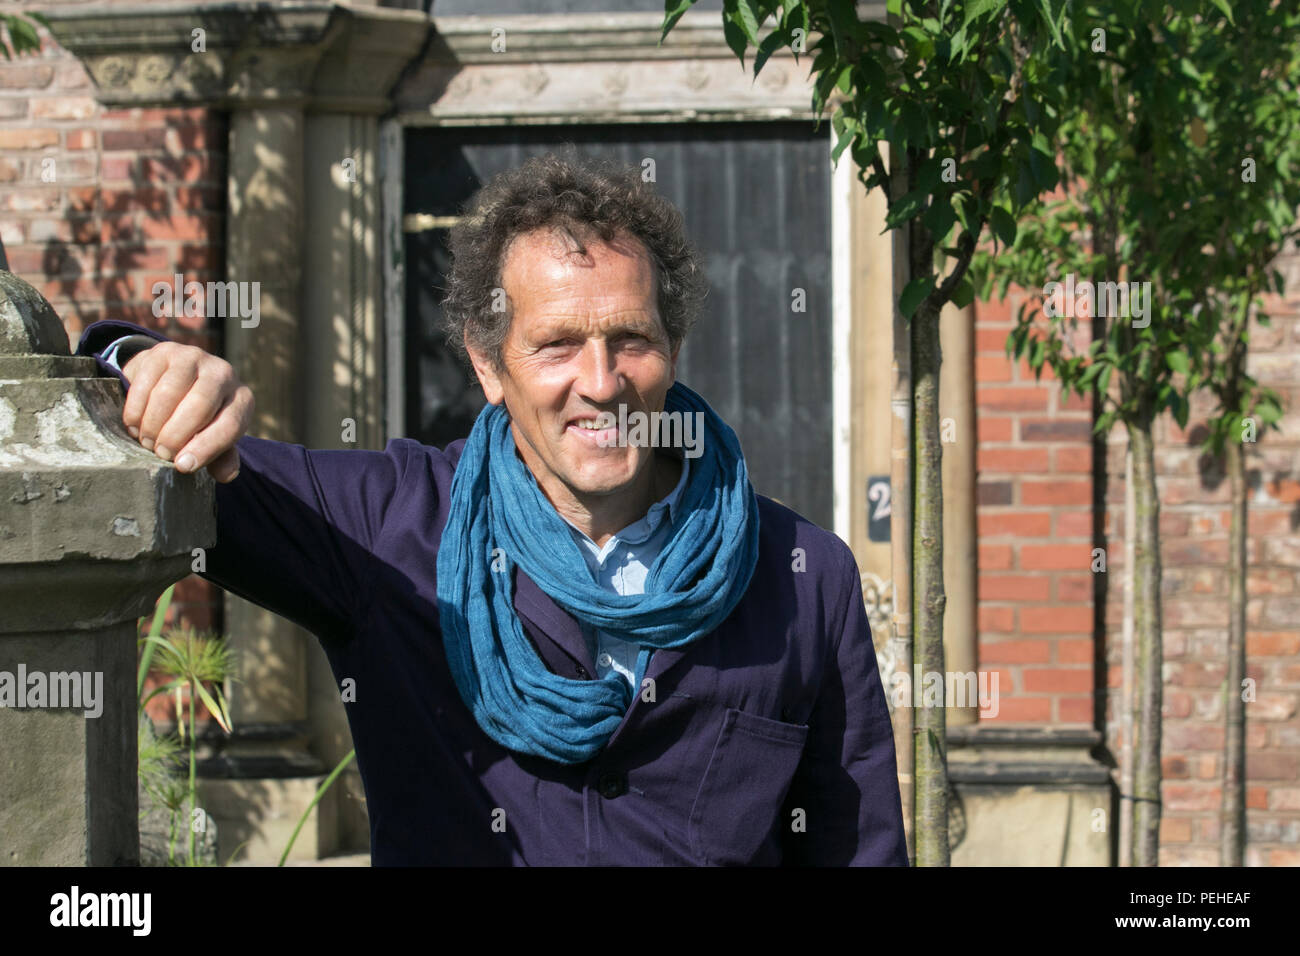 Monty Don greets visitors as he opens the Southport Flower Show, Merseyside, UK. Aug, 2018. Exhibitors, garden designers, gardening experts  and floral artists wow the visitors to this famous annual event. Stock Photo